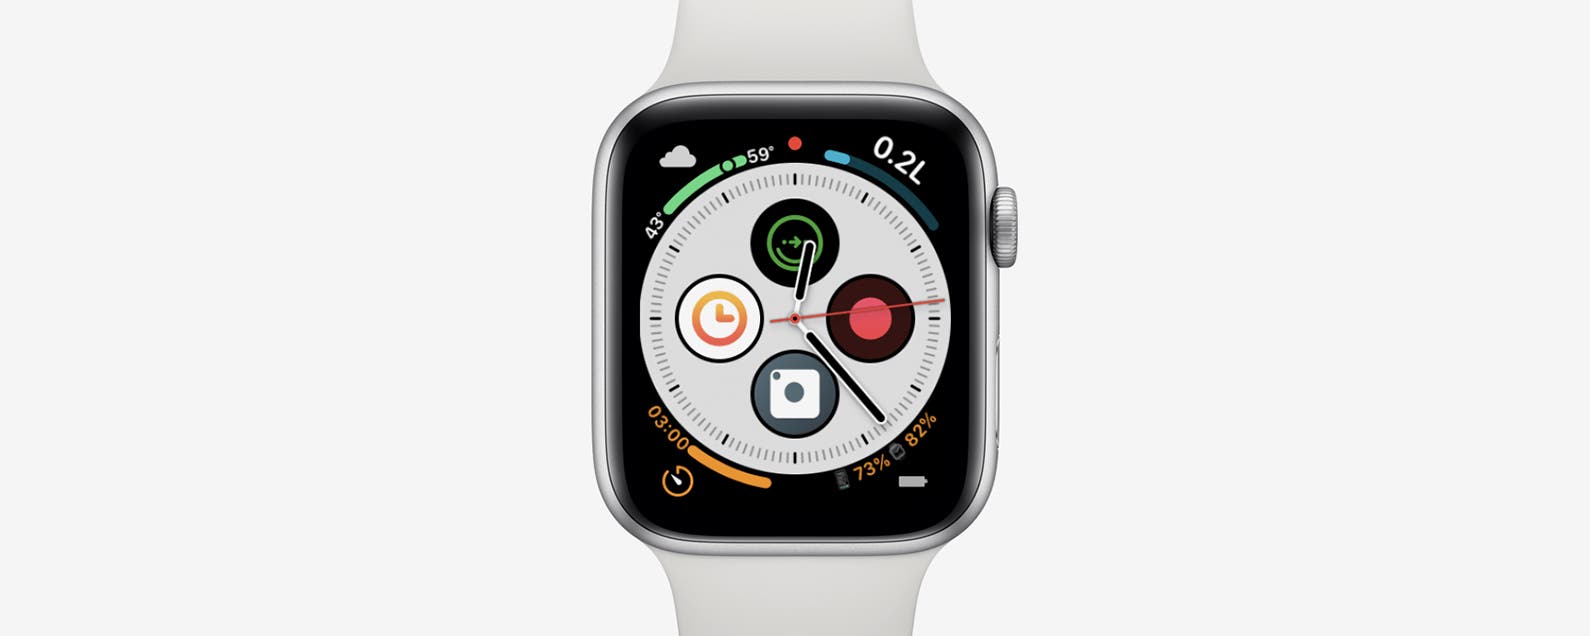 25 Best Apple Watch Complications by Third-Party Developers